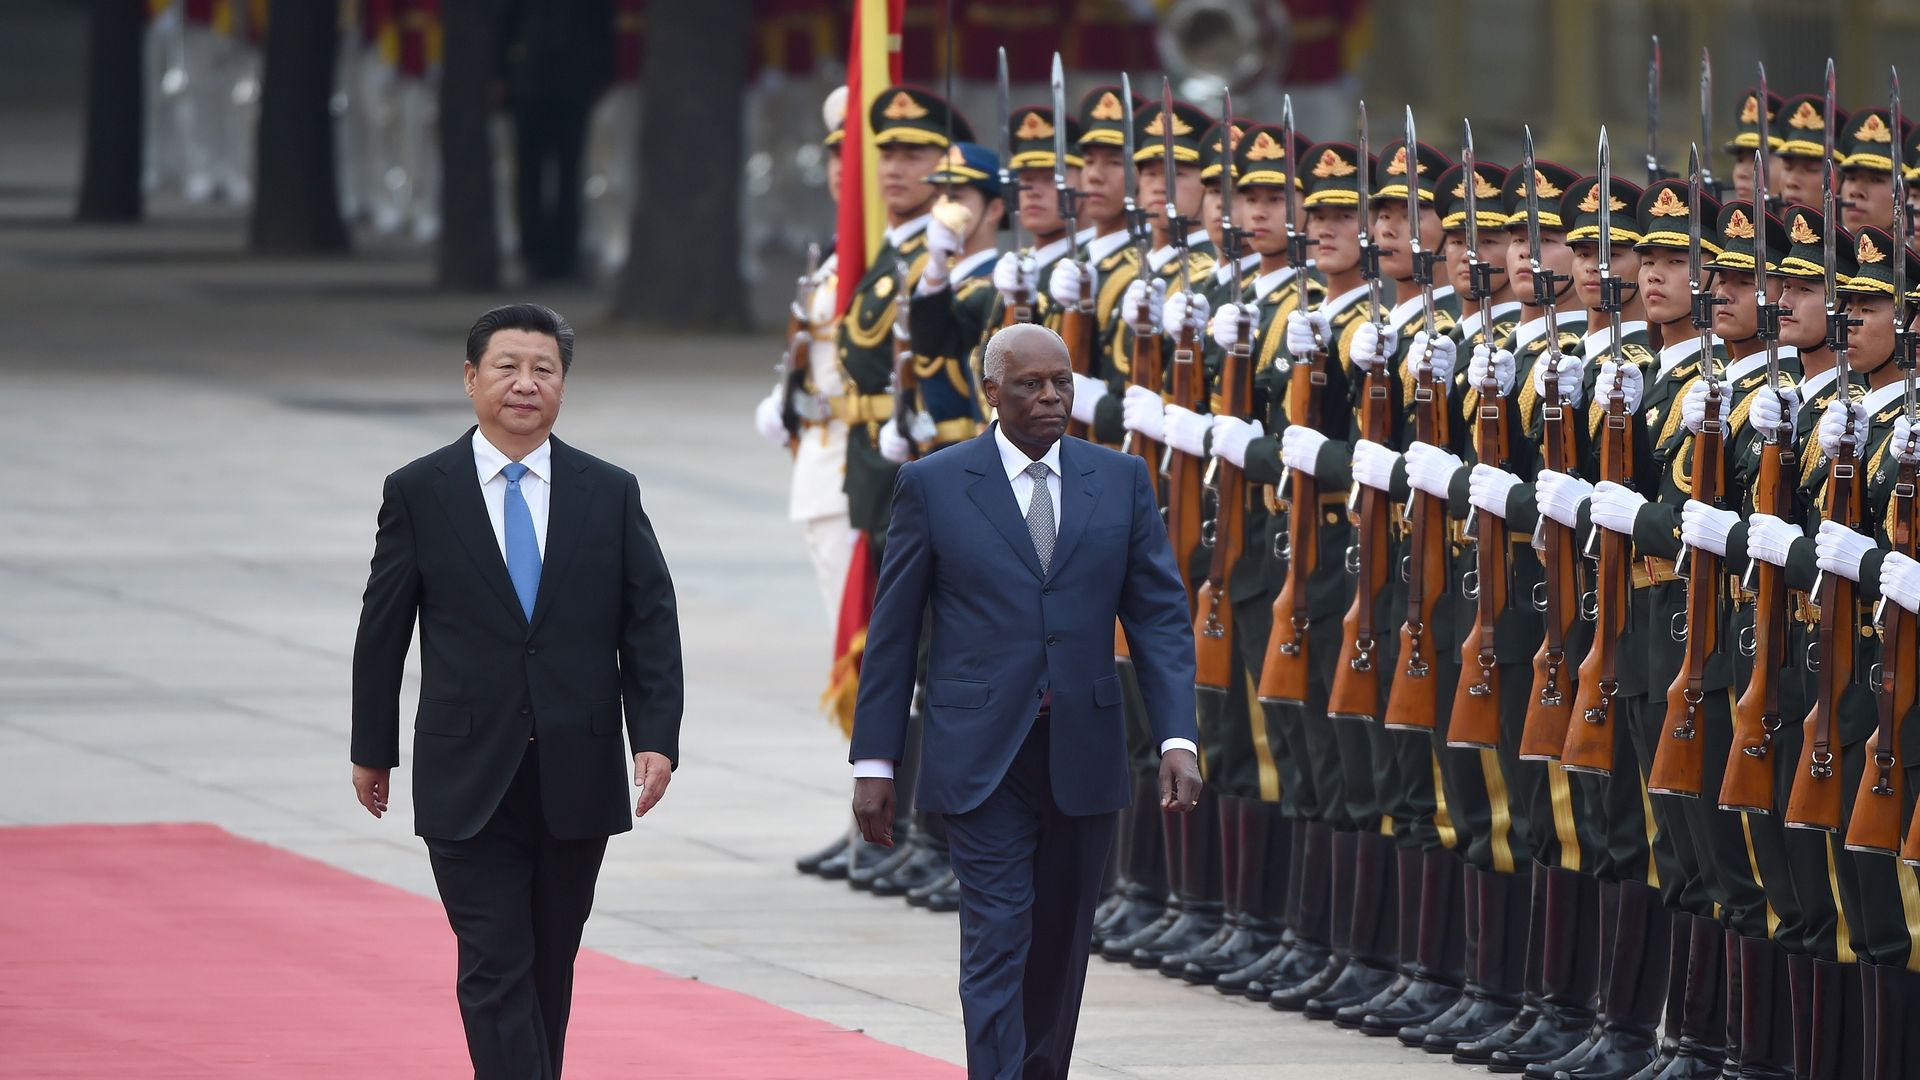 The two leaders walk by Chinese soldiers